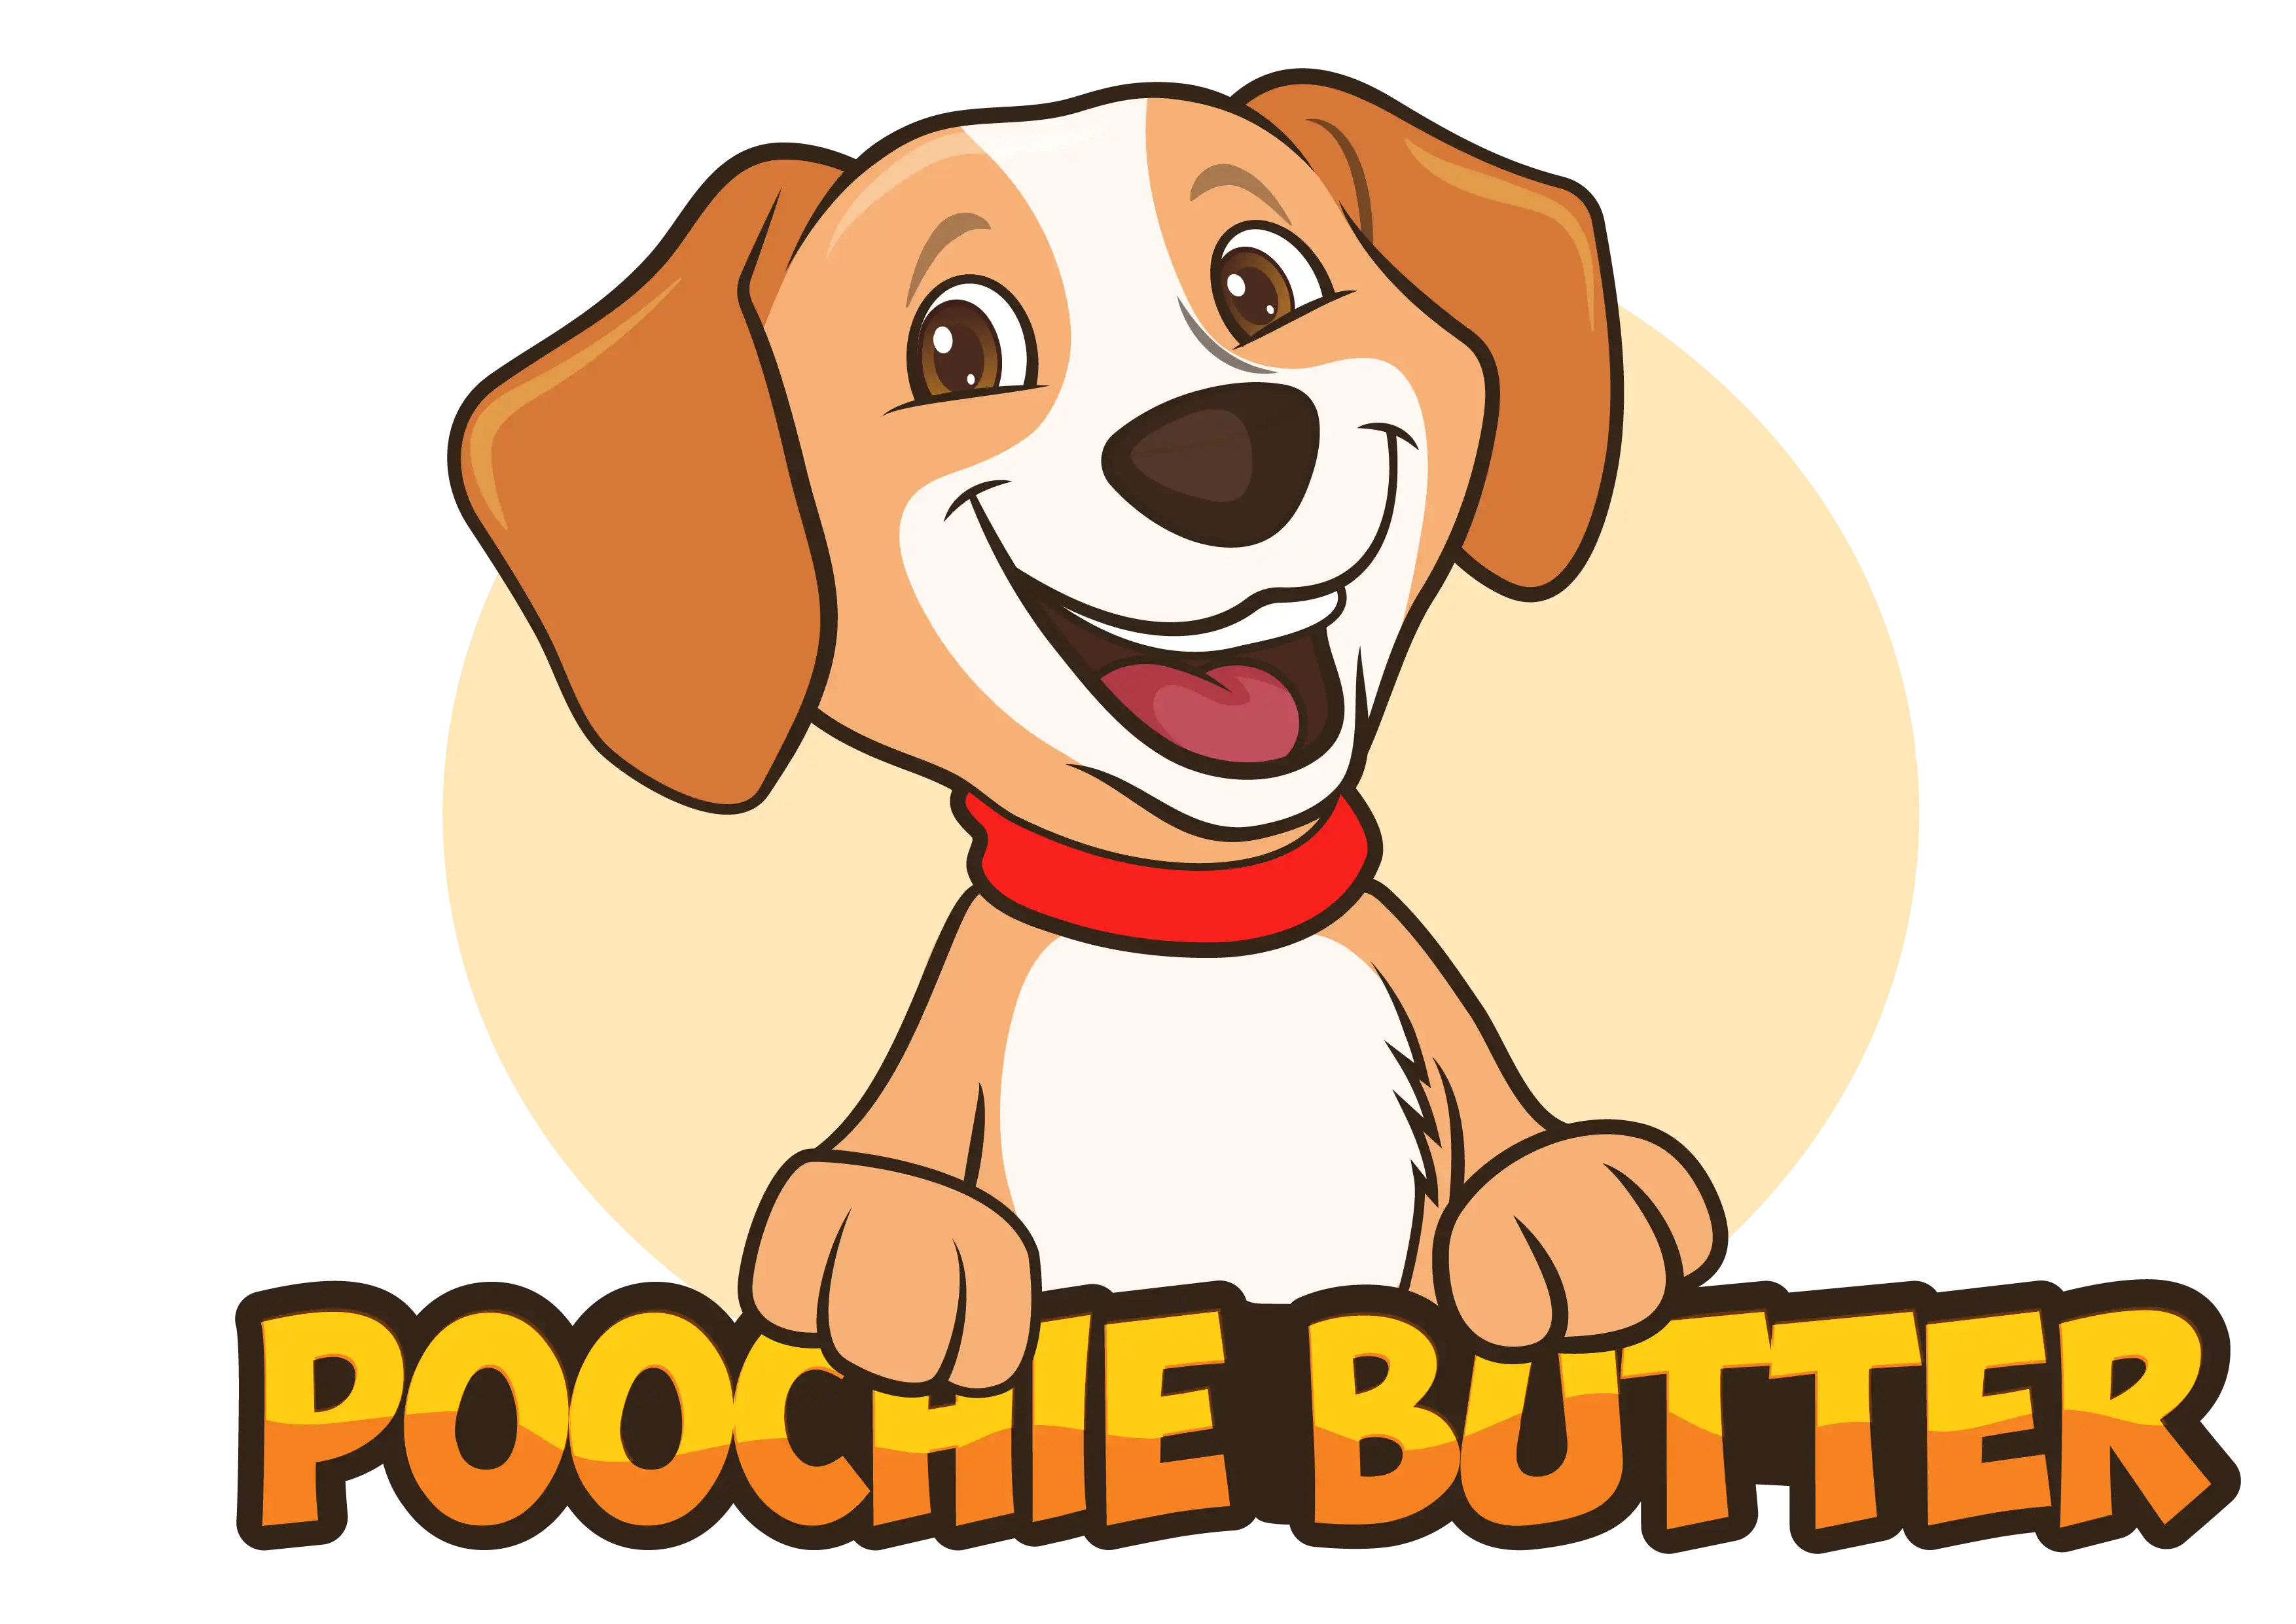 Check Out Products By Poochie Butter